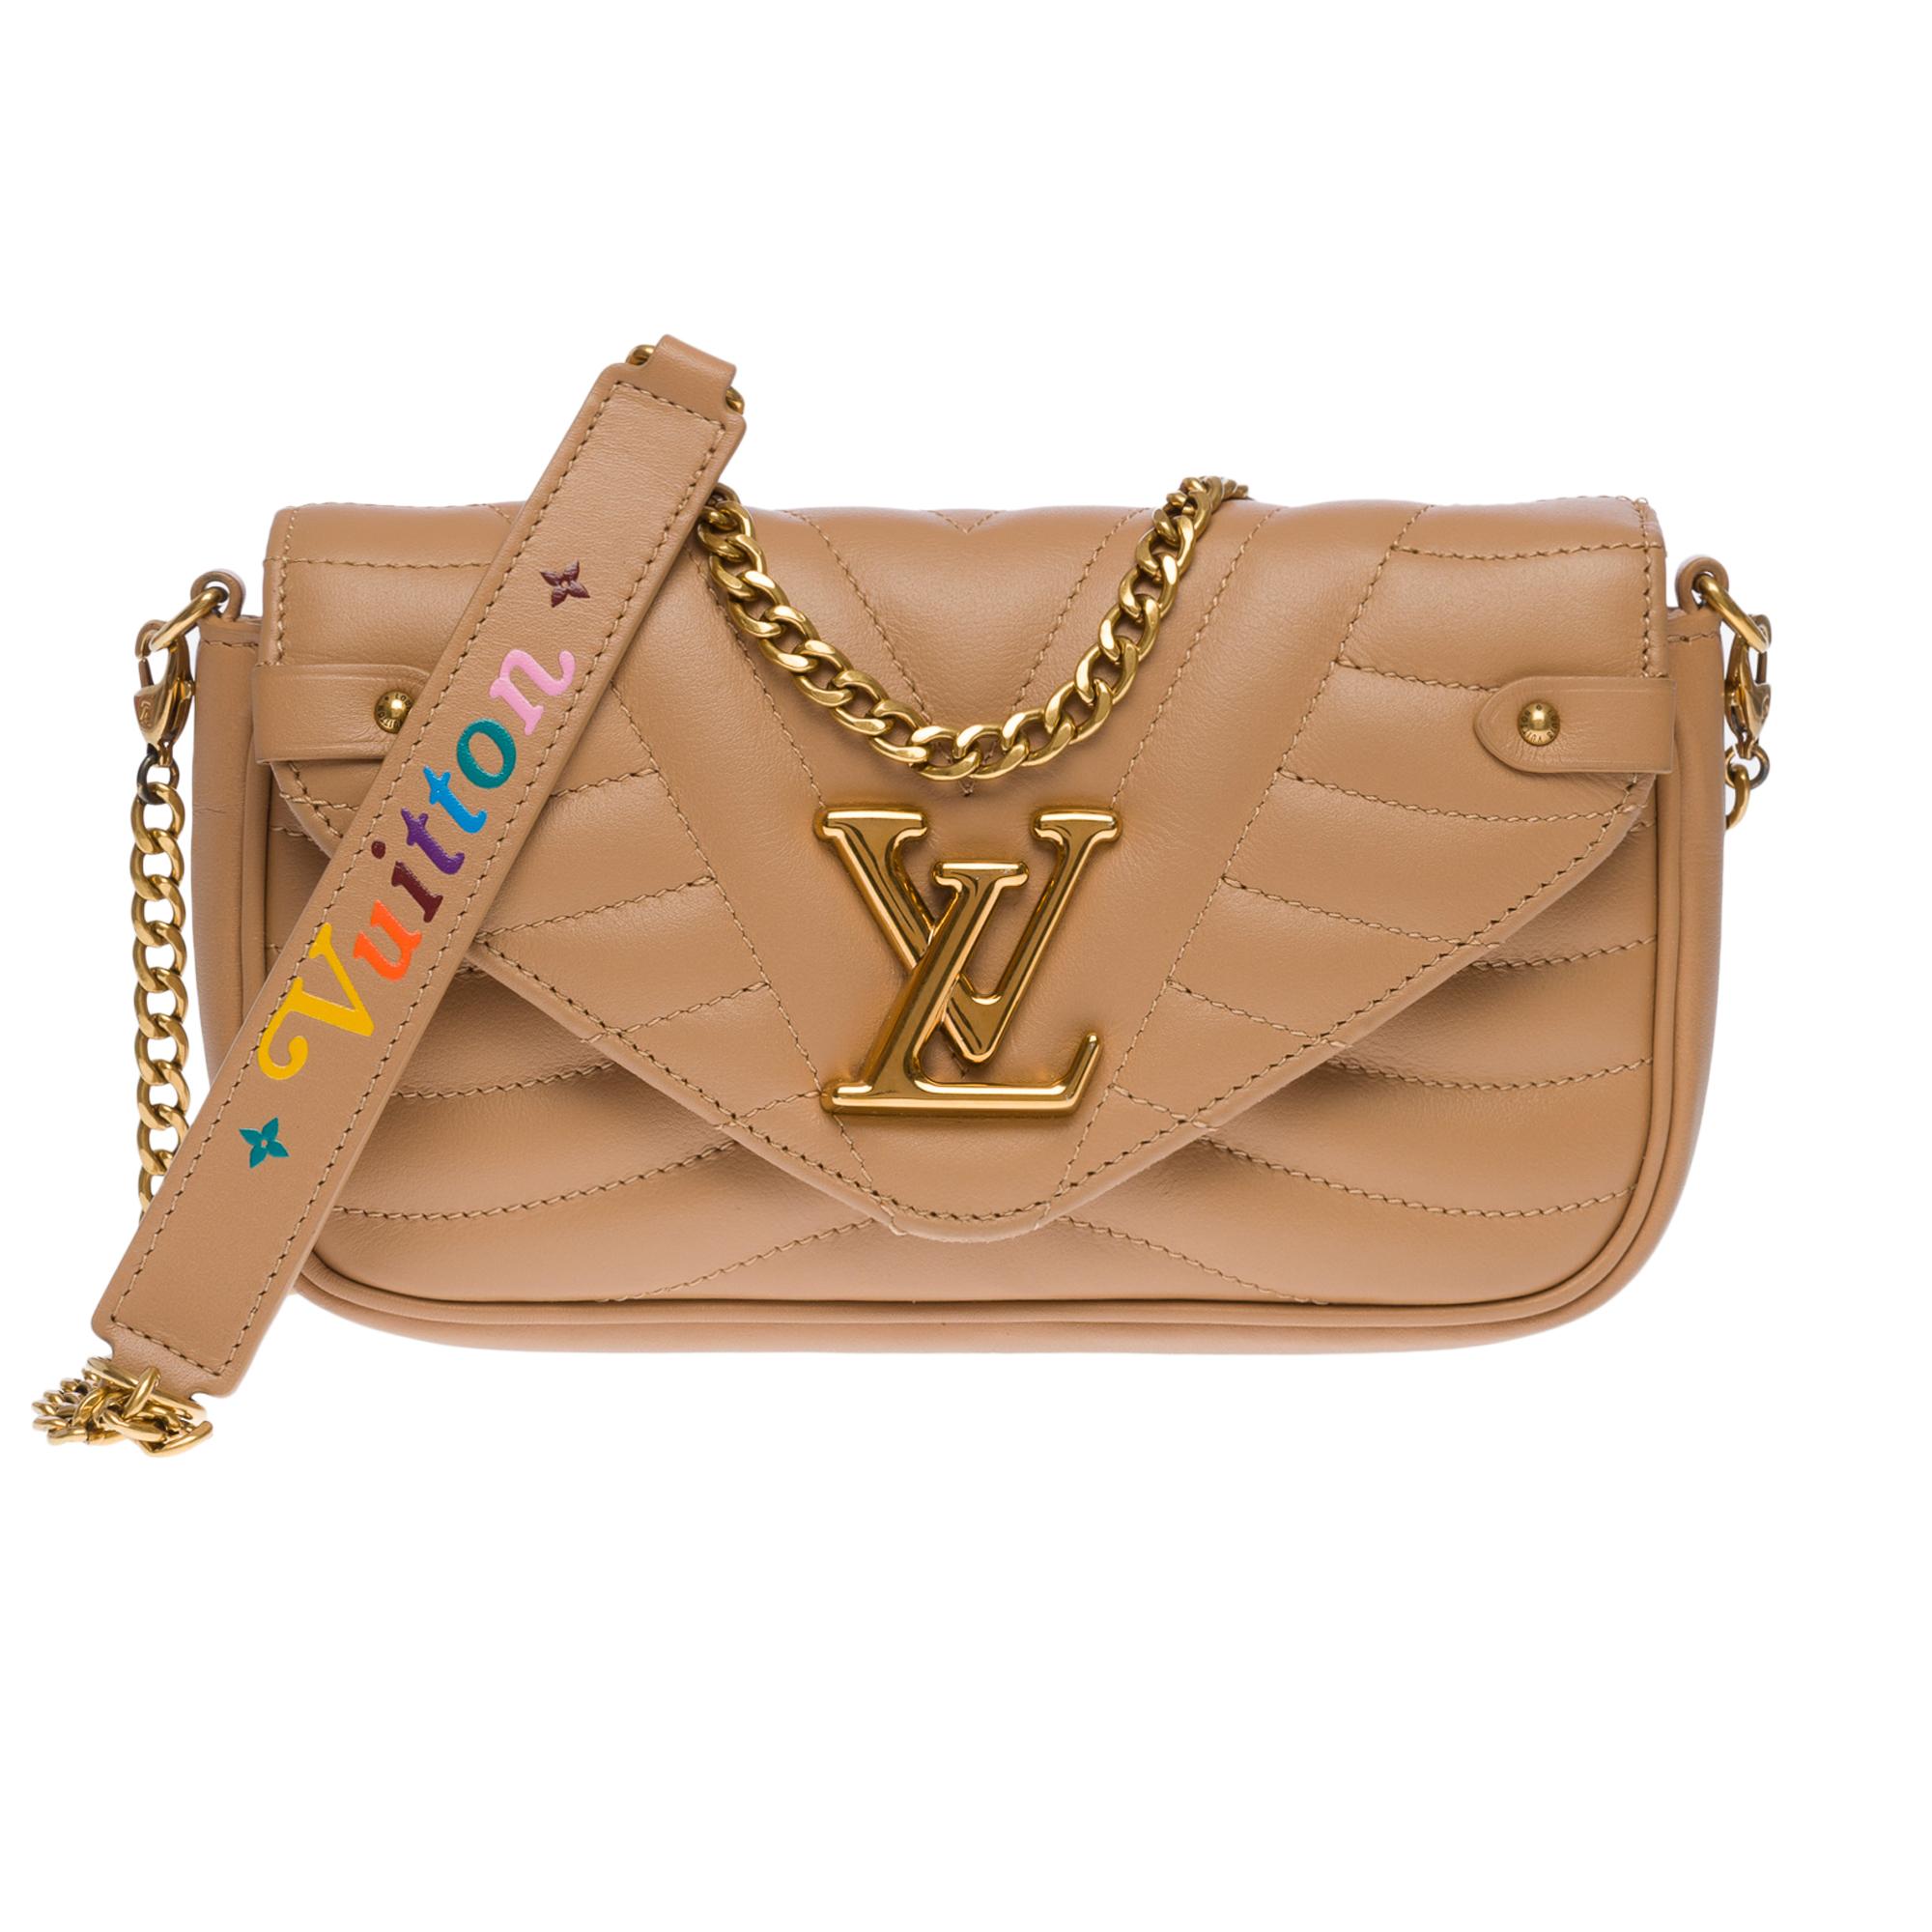 This Louis Vuitton New Wave Clutch Bag is crafted in hazelnut quilted calf leather
Its golden metal chain-handle allows a hand or shoulder or crossbody carry

Hazelnut
Smooth calf leather
Cow leather trim
Hazelnut microfiber lining, 1 zip pocket, 3